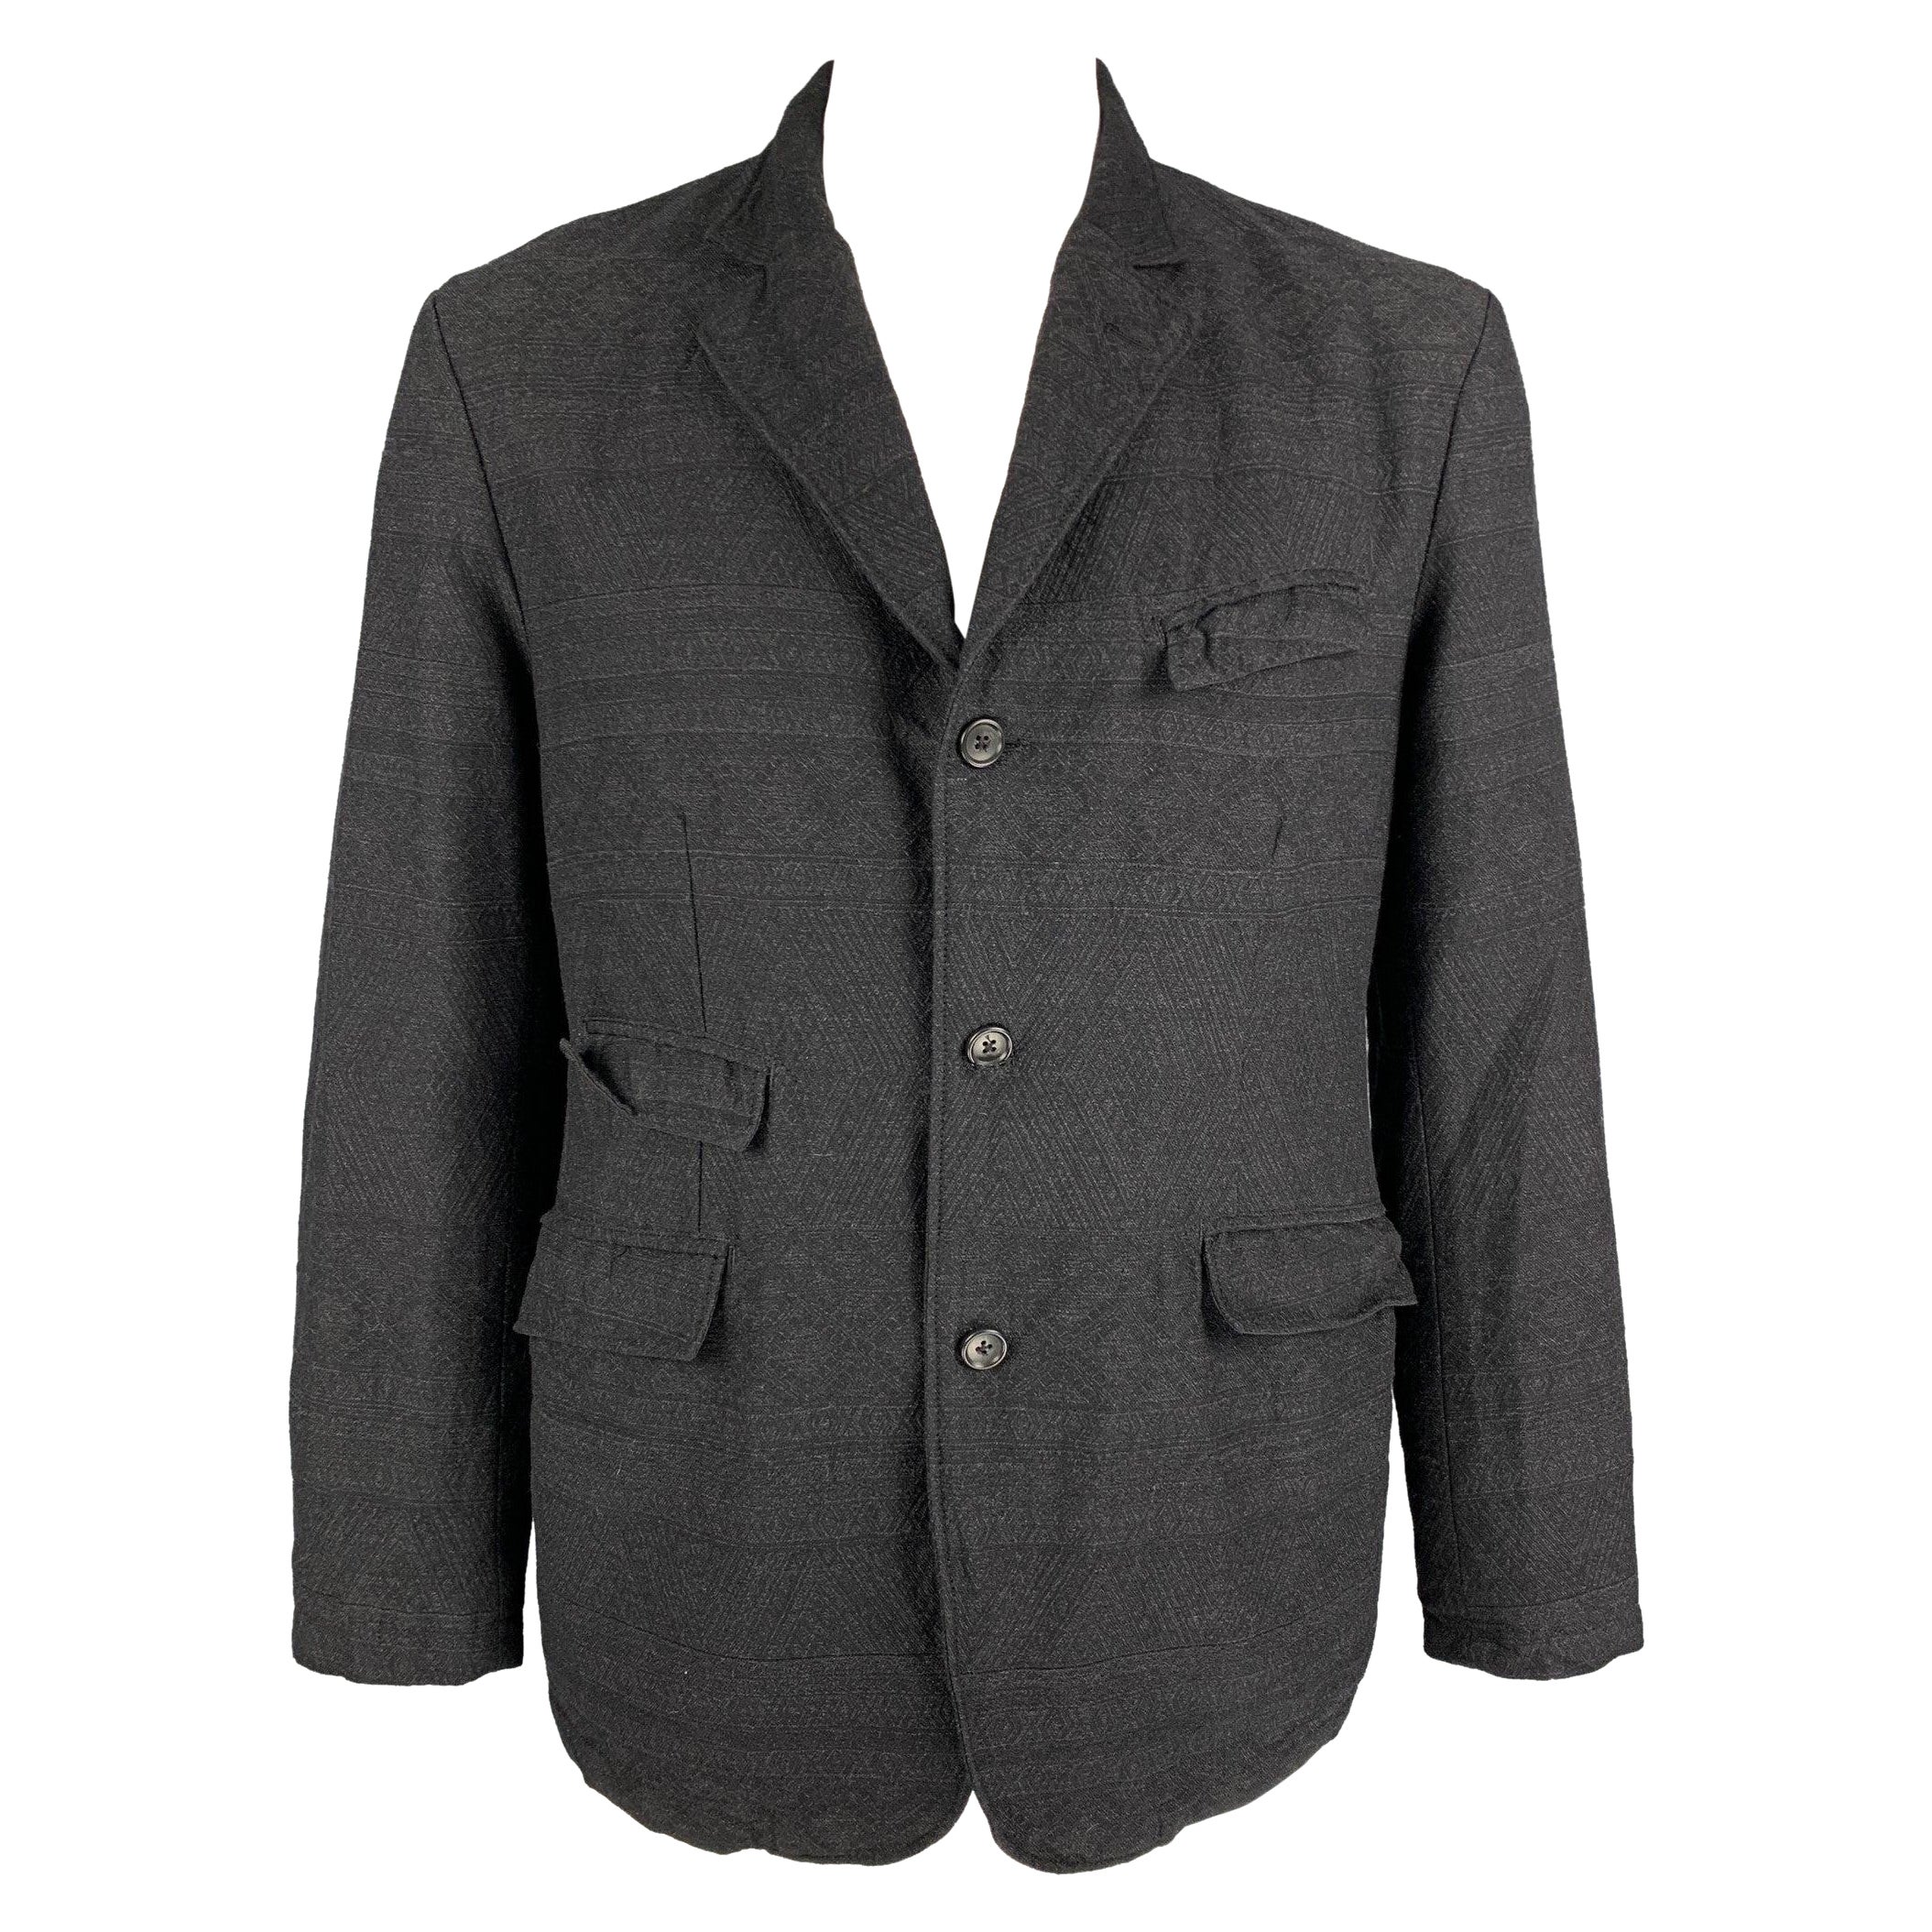 ENGINEERED GARMENTS Size XL Charcoal Textured Cotton / Wool Notch Lapel Jacket For Sale